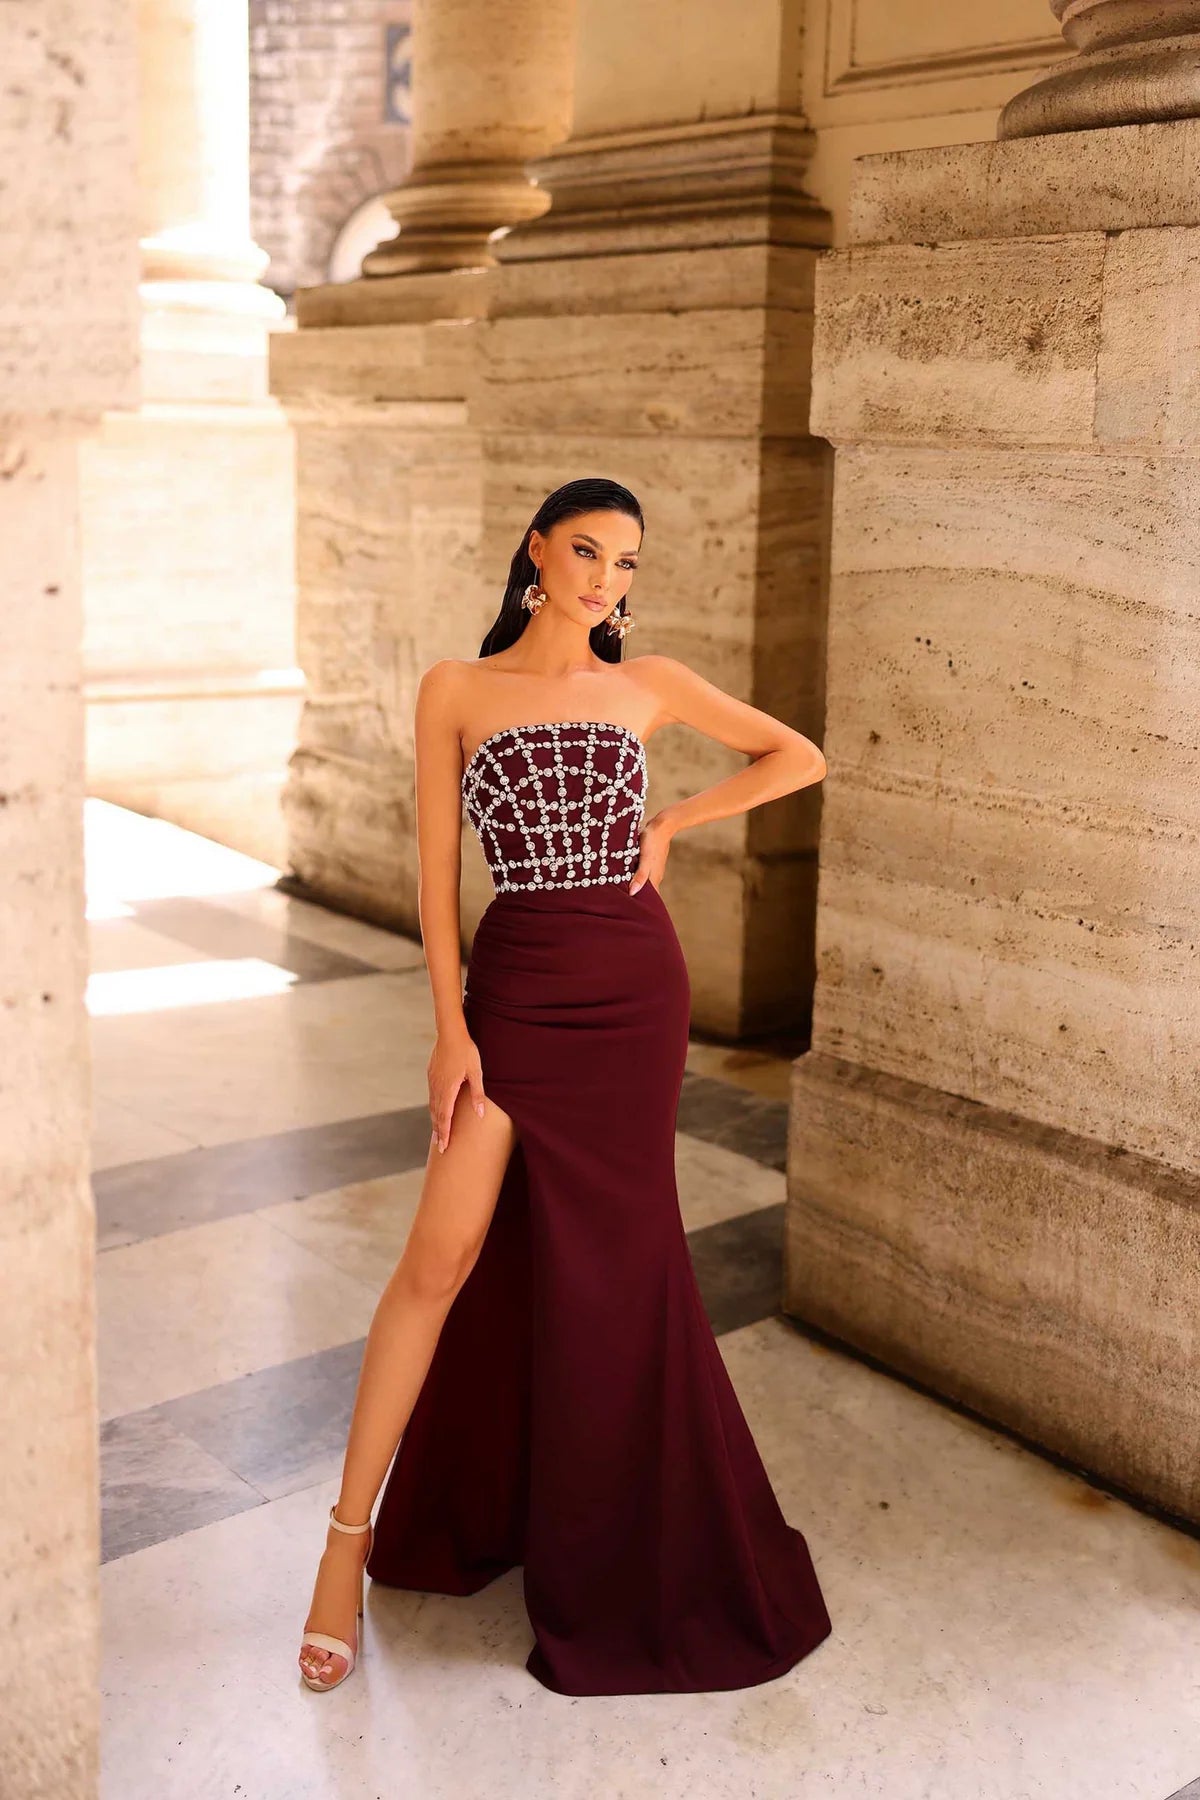 Nicoletta NC1092 Strapless Formal Evening Gown - A stunning strapless gown with a jeweled bodice, train, and high slit.